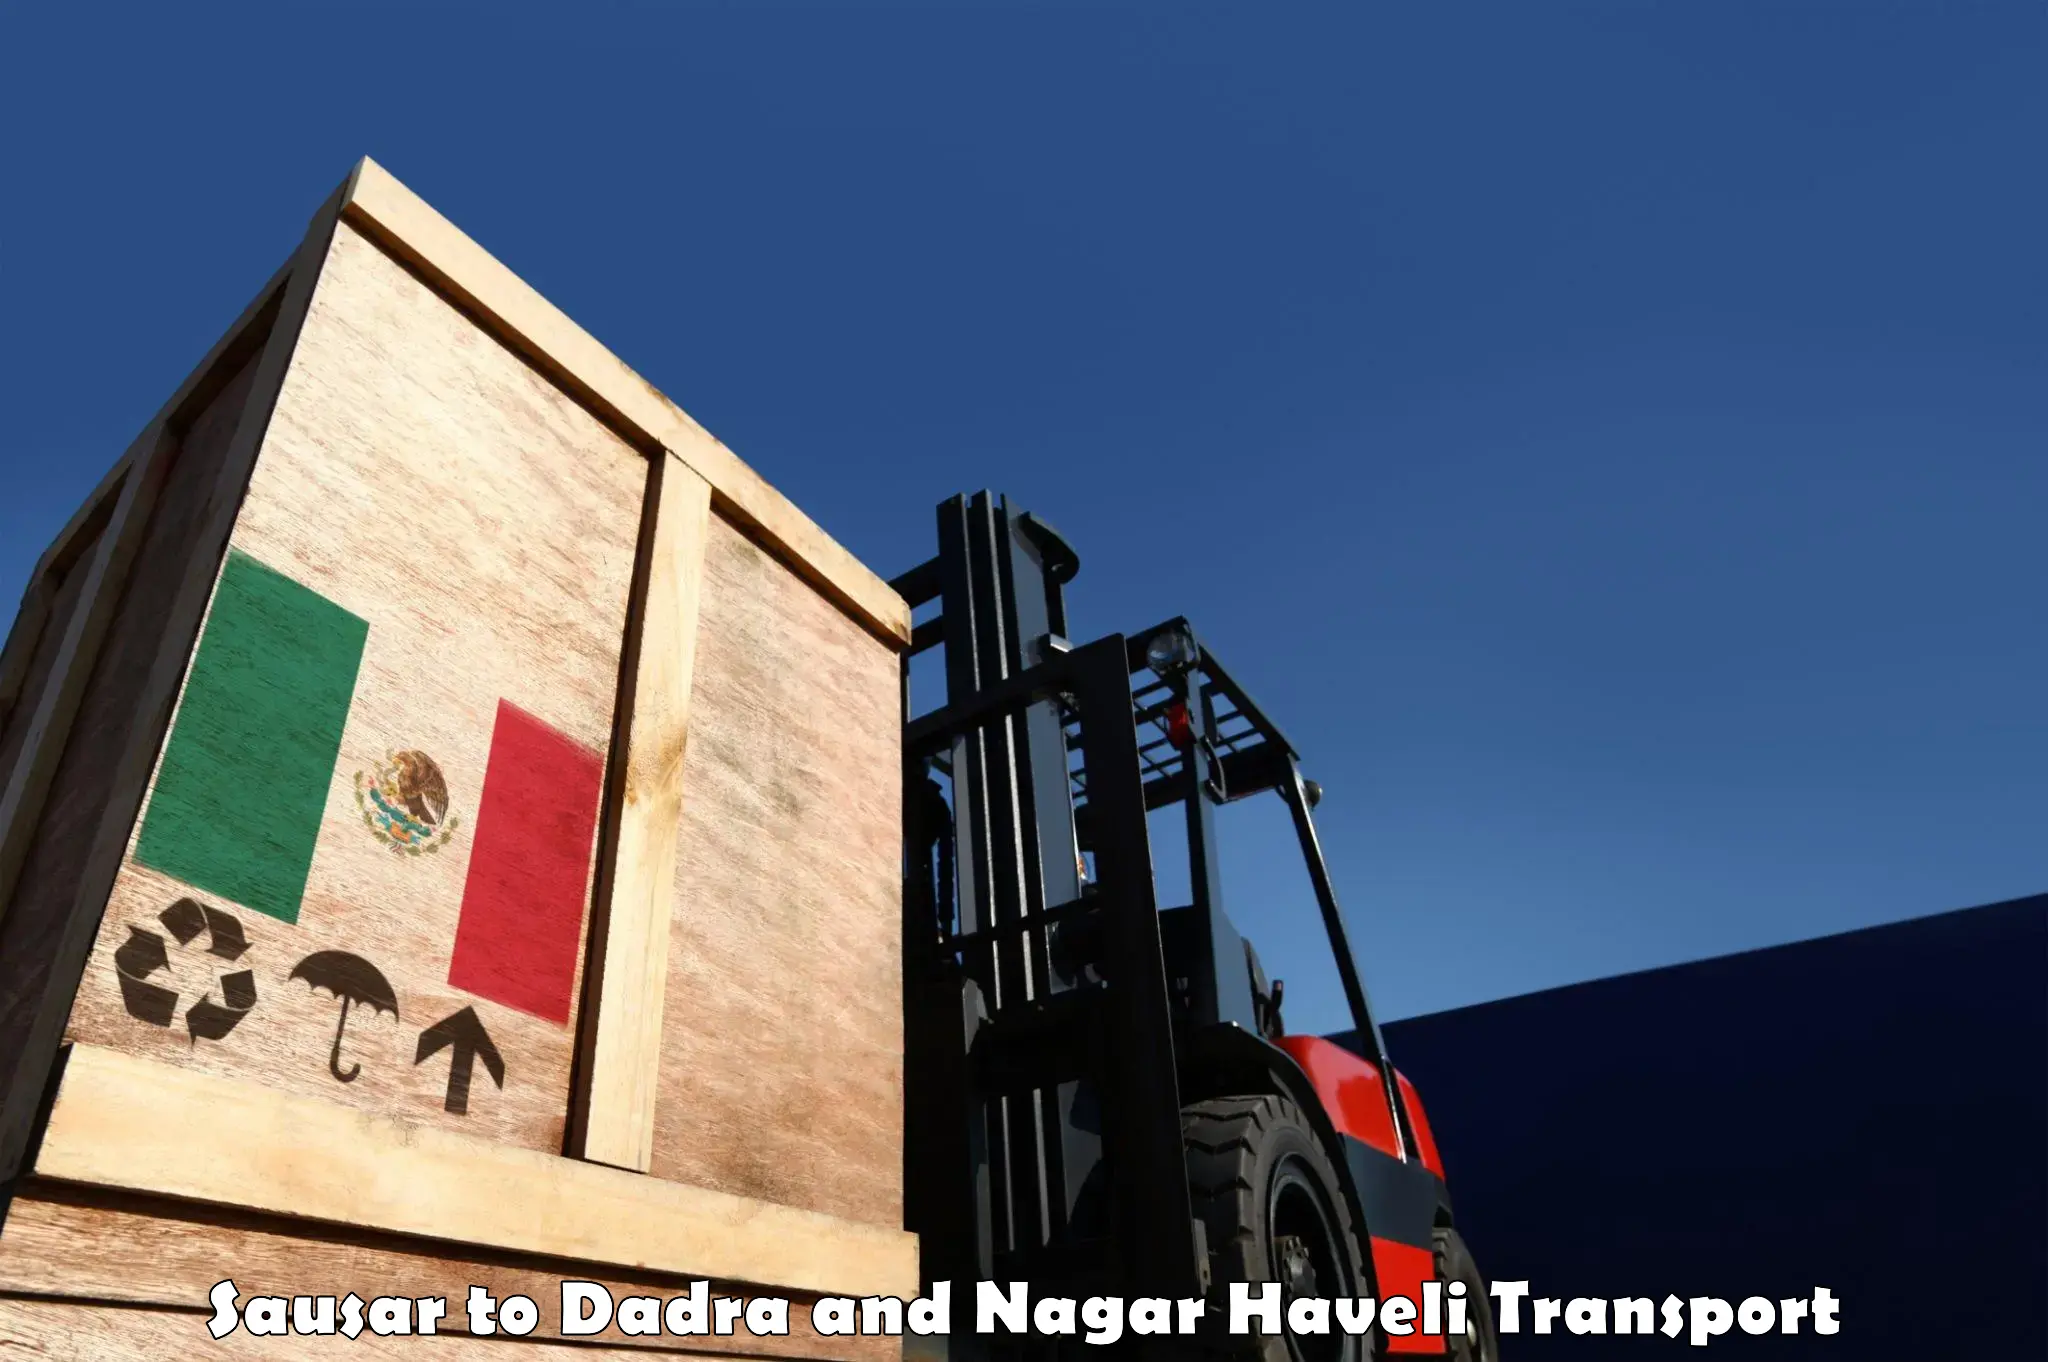 Truck transport companies in India Sausar to Dadra and Nagar Haveli